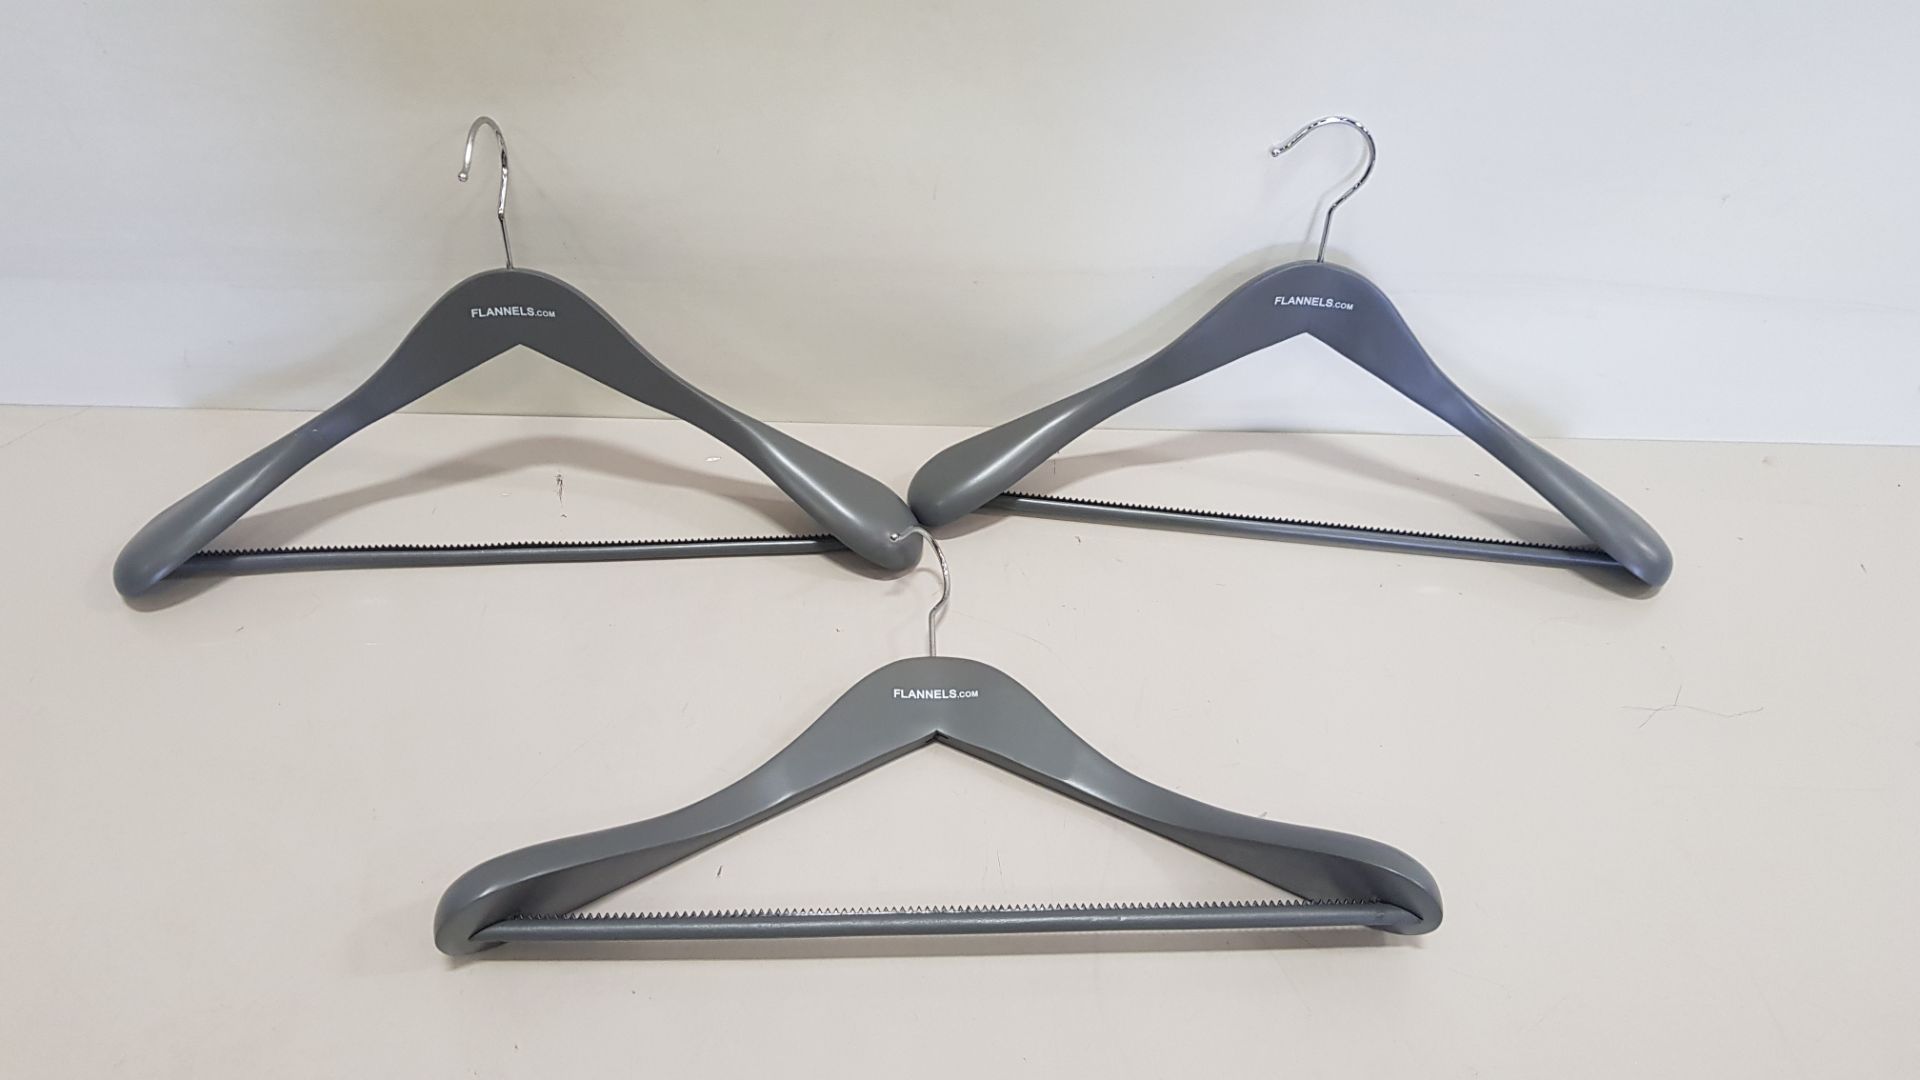 144 X BRAND NEW FLANNELS BRANDED COAT HANGERS WITH GRIPPED TROUSER BAR (IN 4 CARTONS) - (EBAY